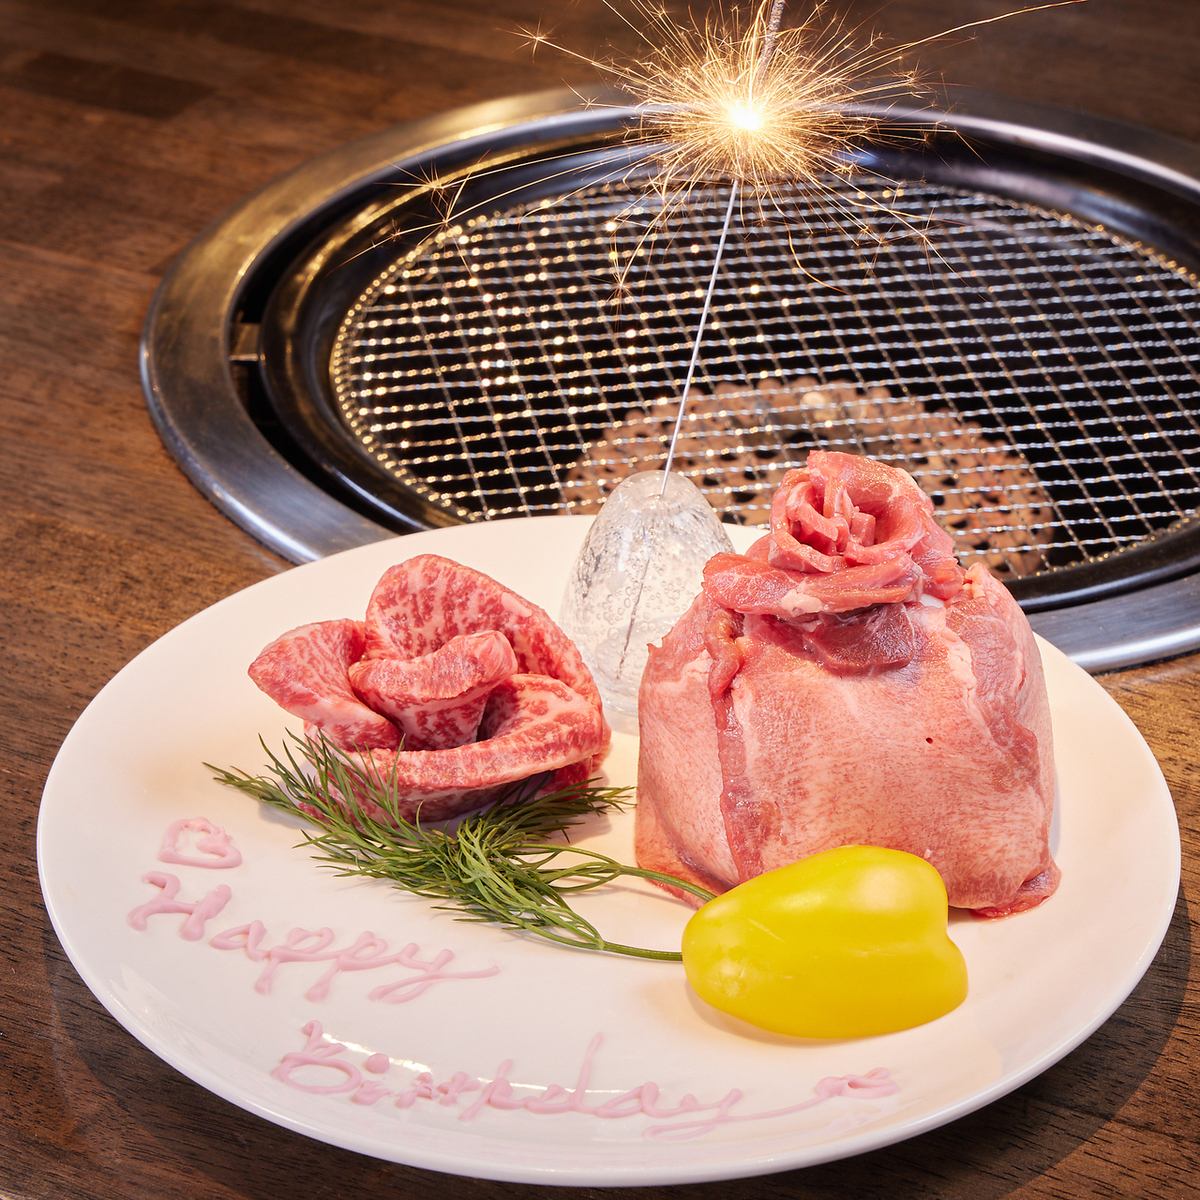 Perfect for celebrations! <Meat cake> is available ♪